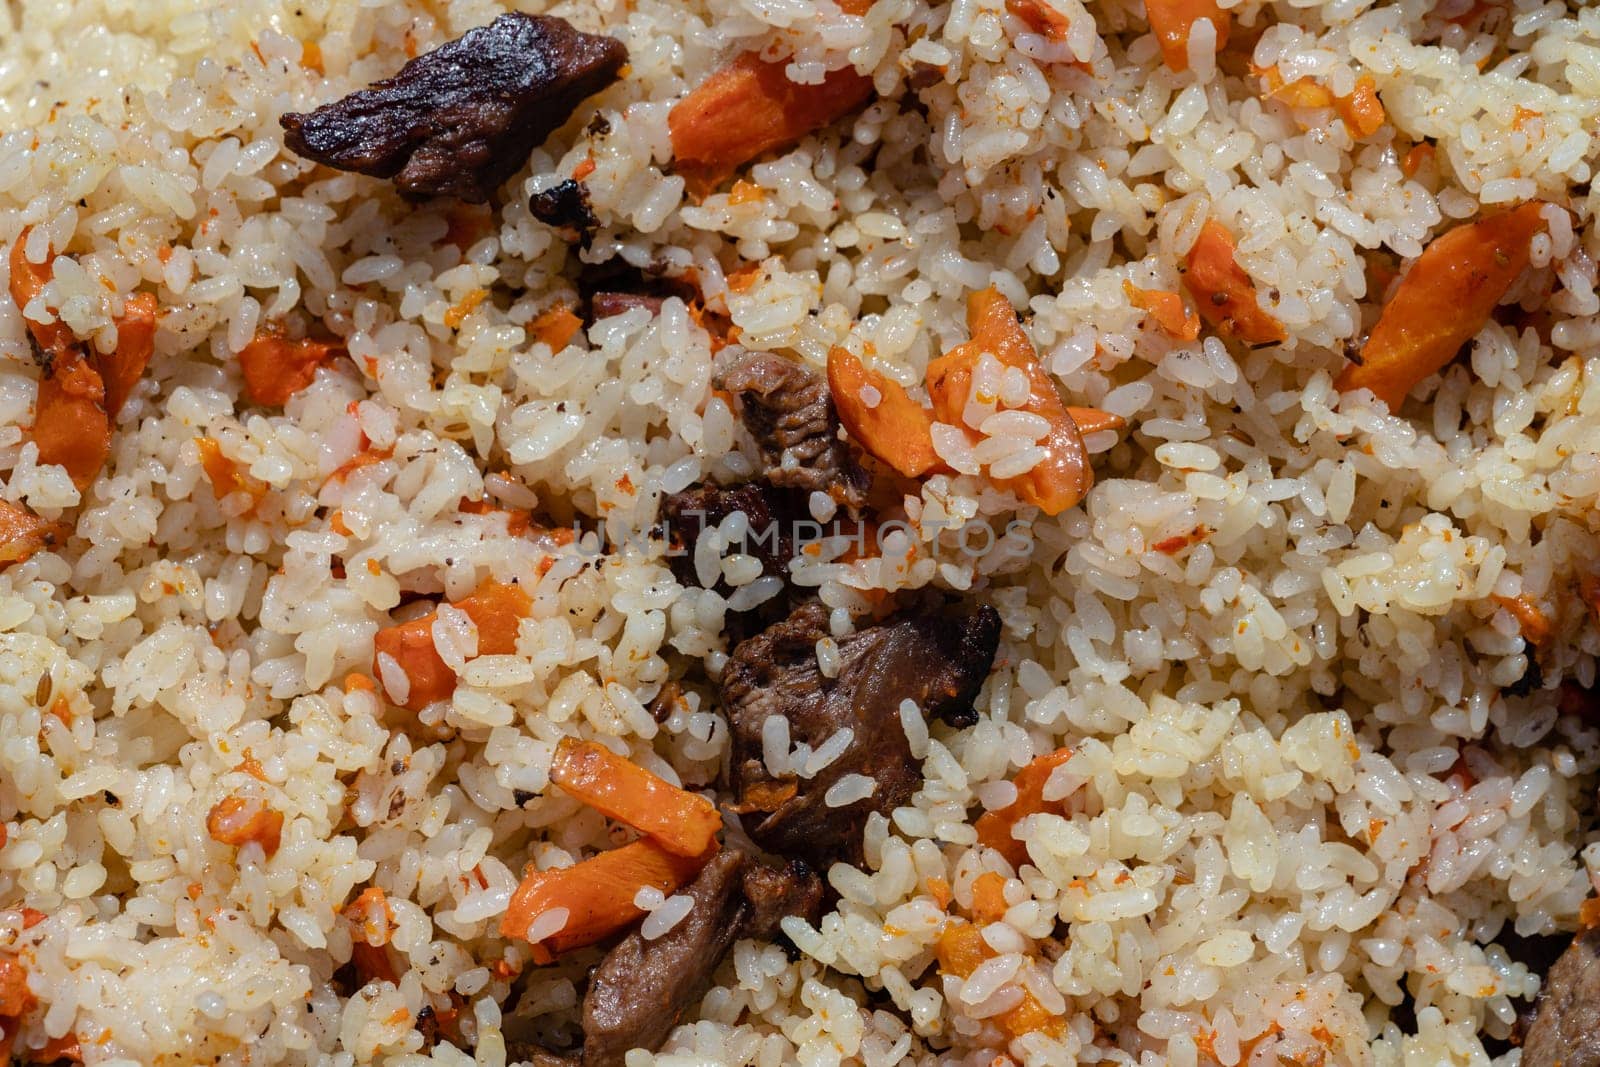 Closeup view of Eastern tasty food background. Traditional Asian culinary dish - pilaf. Ingredients: rice with slices of meat, fat and vegetables (carrot, garlic), spices - popular recipe.